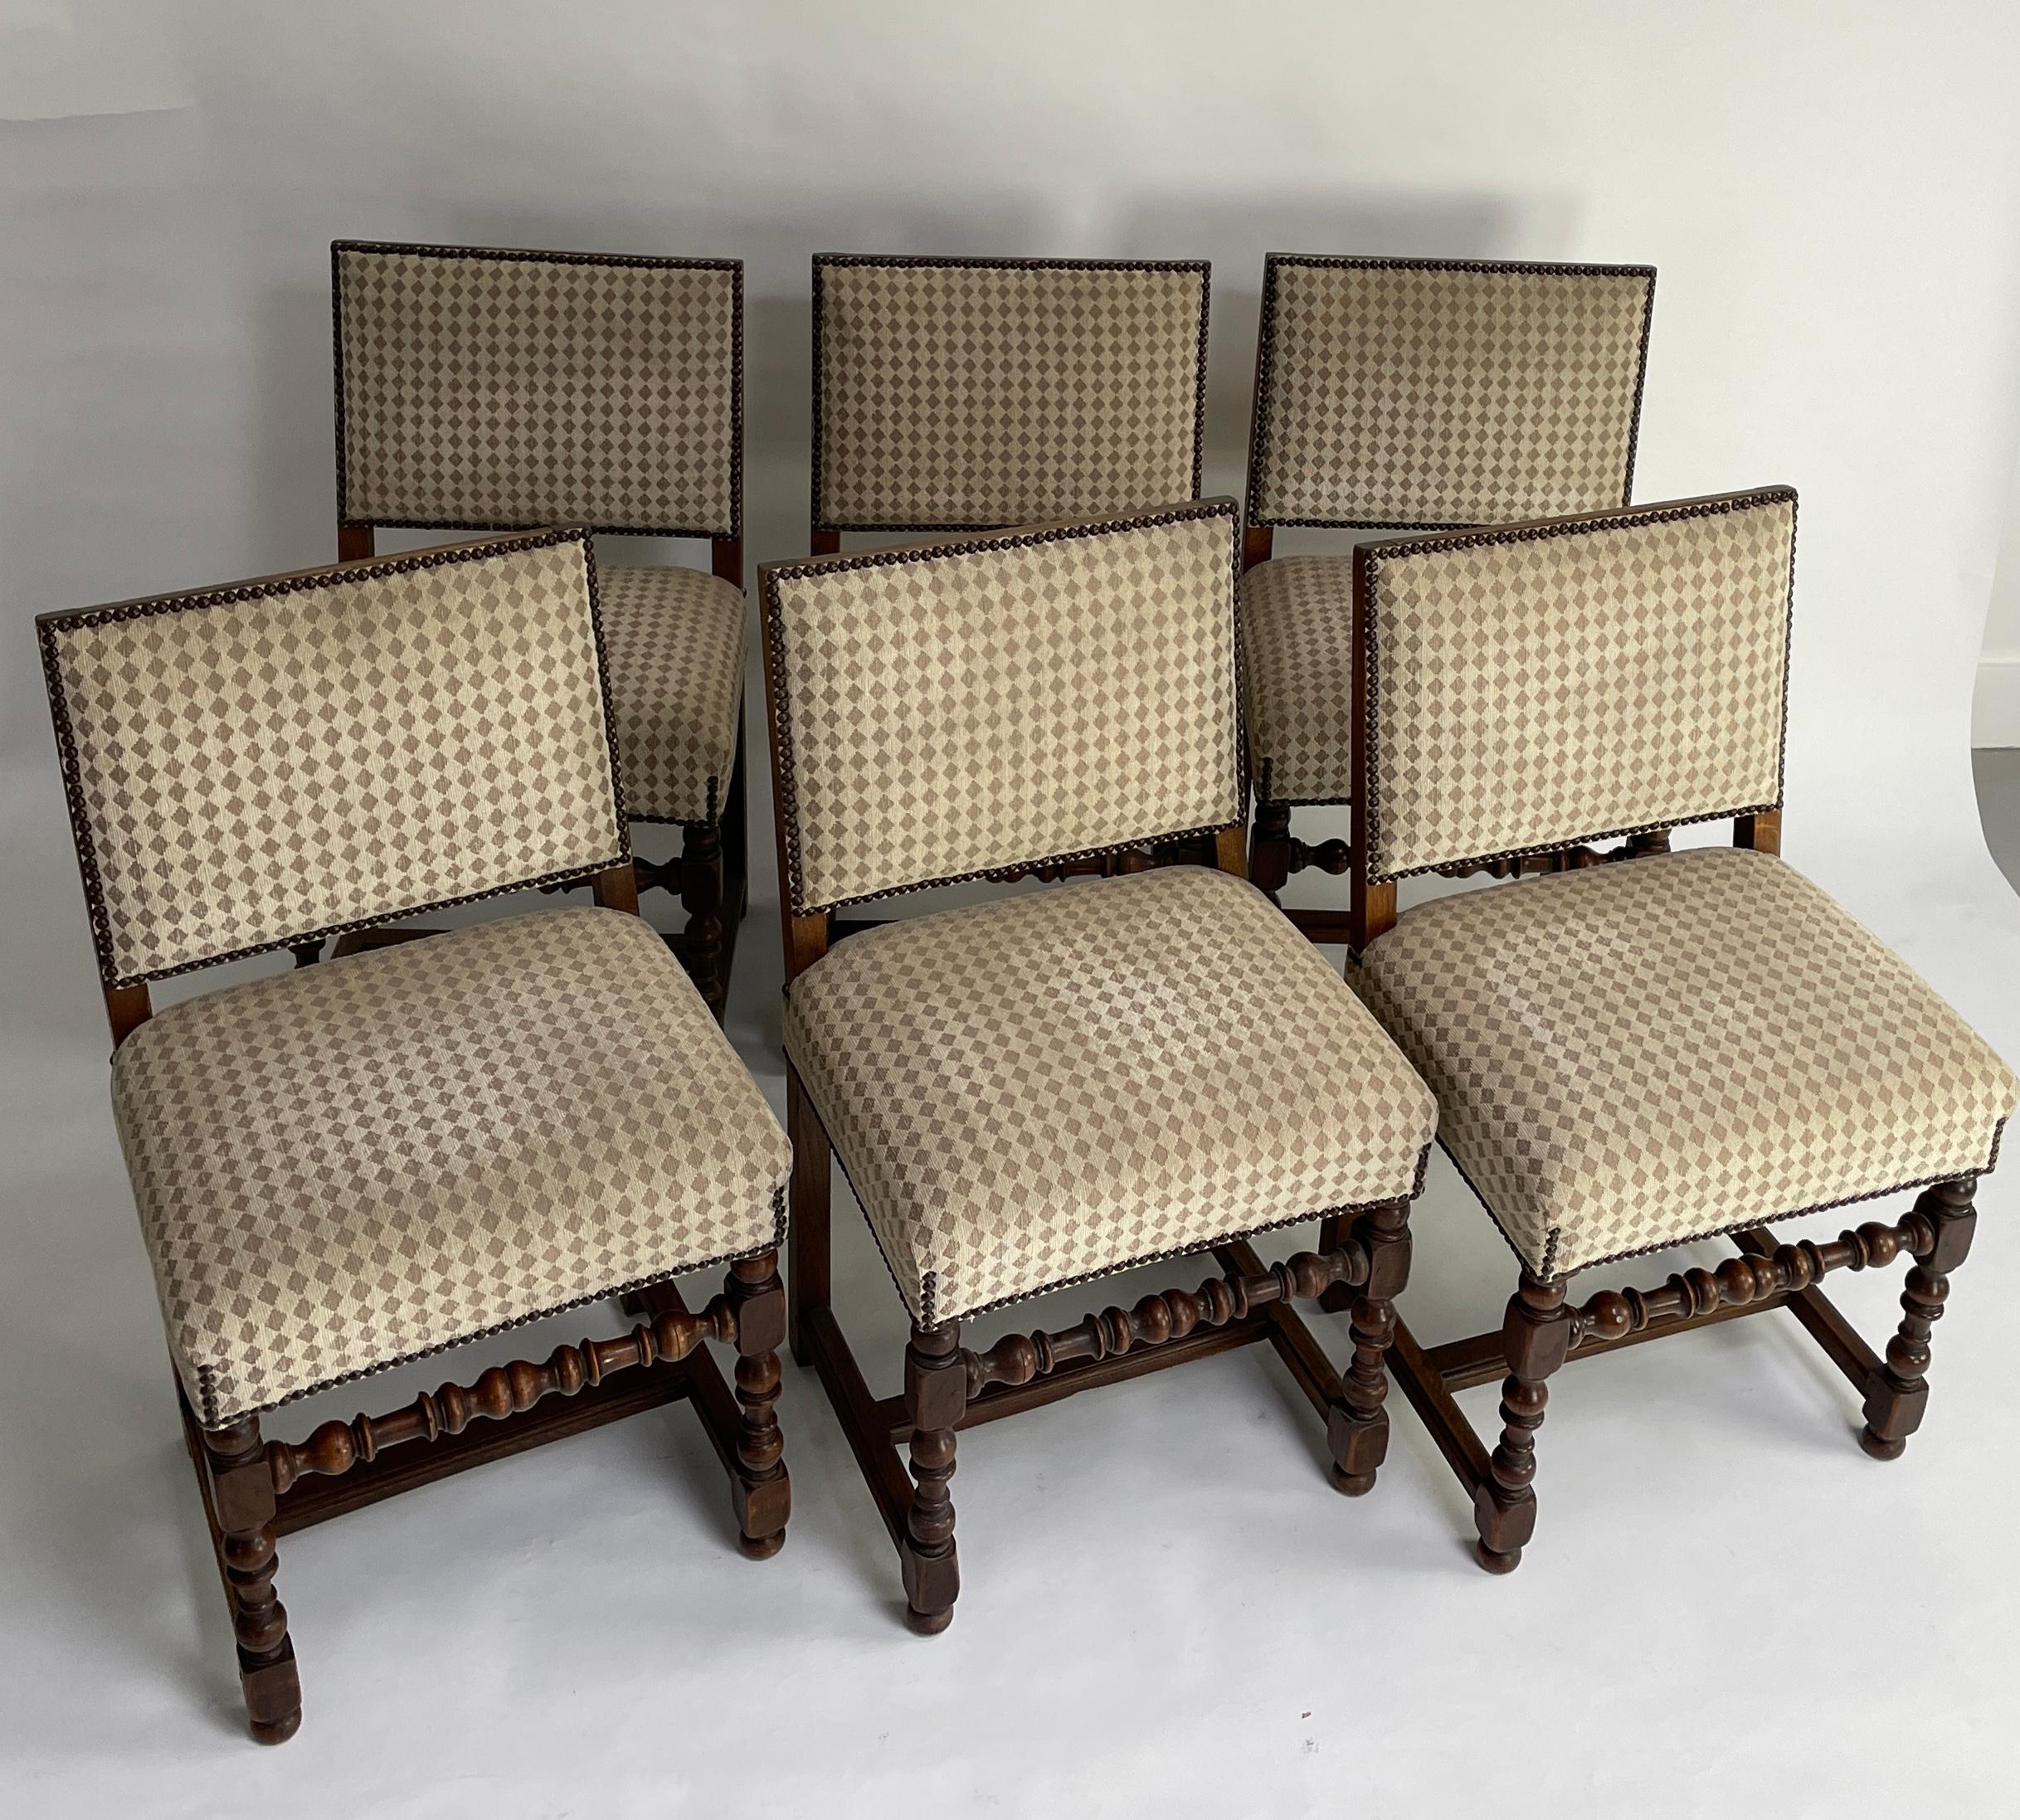 Set of 6 Louis XIII style with turned wood walnut detailing. New upholstery on the seat cushions.